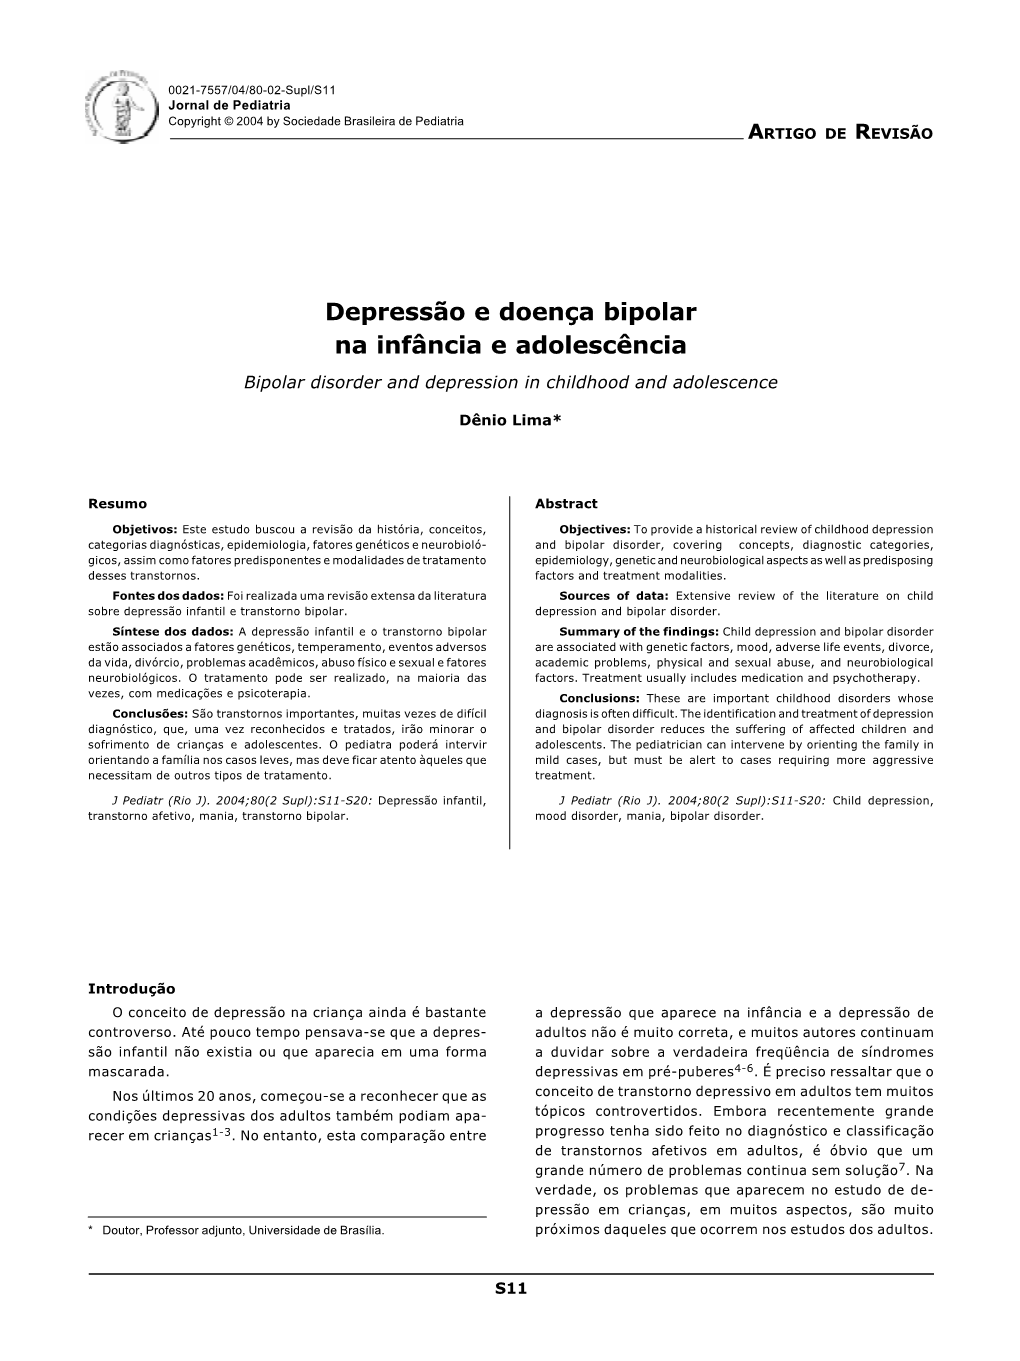 Bipolar Disorder and Depression in Childhood and Adolescence